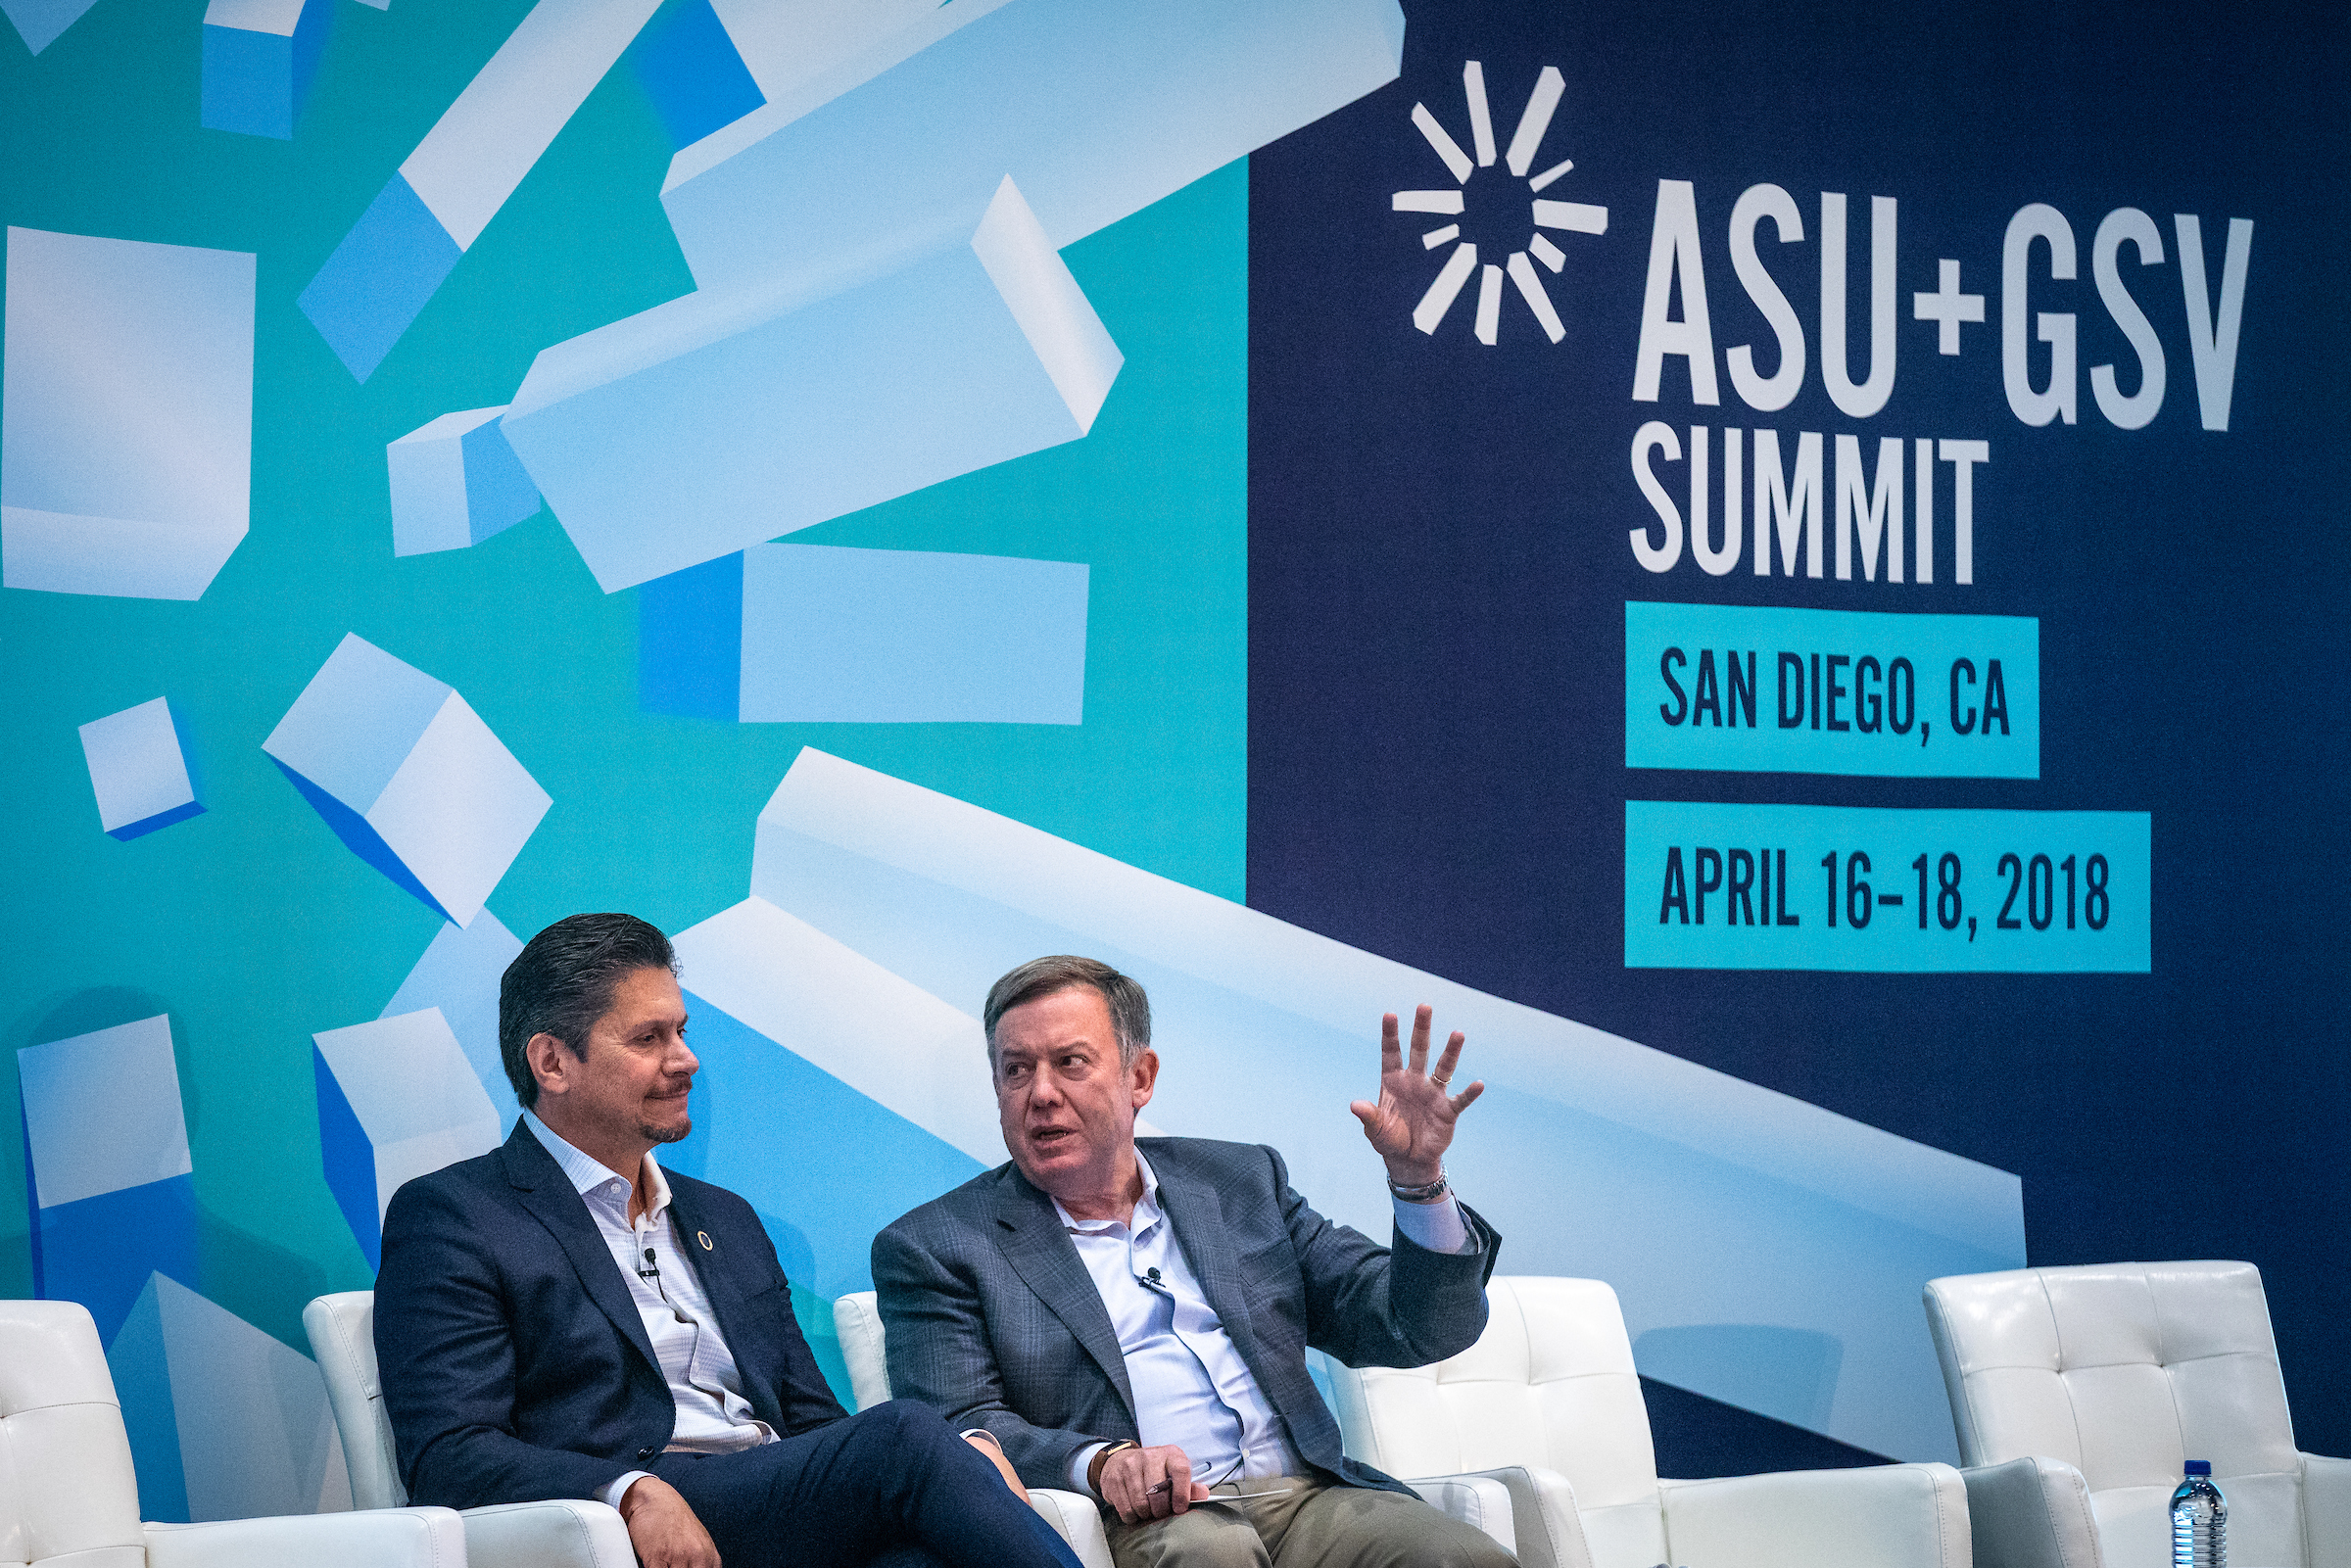 Chancellor Eloy Ortiz Oakley with the California Community Colleges talks with ASU President Michael Crow at the ASU GSV Summit